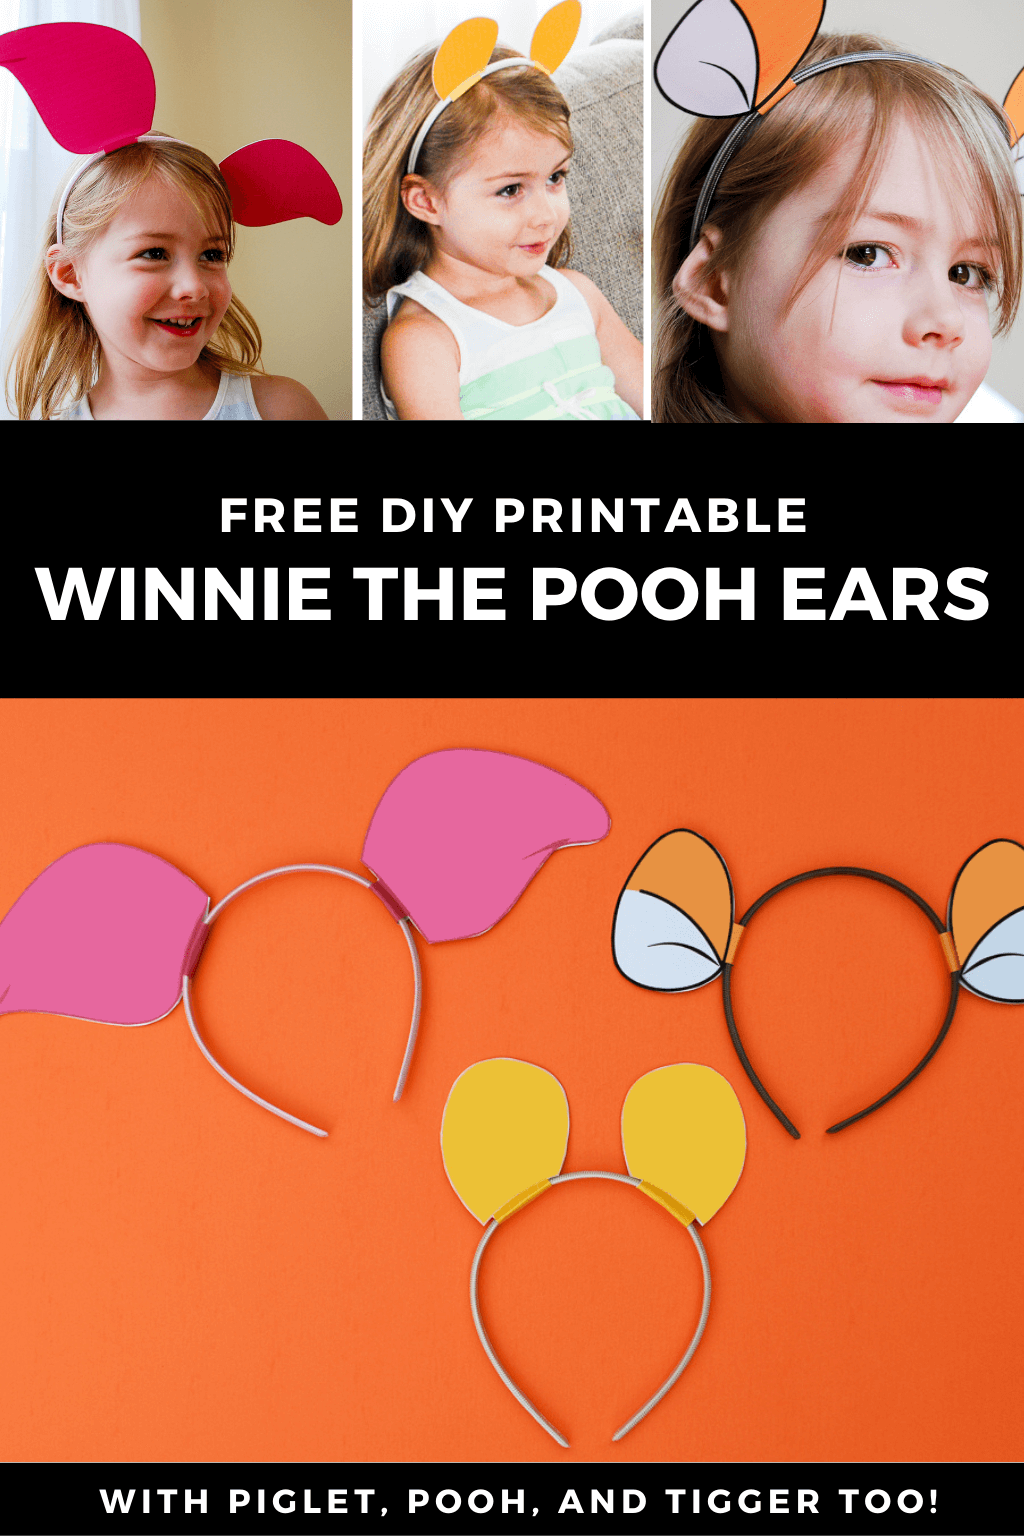 DIY Winnie the Pooh Ears for Winnie the Pooh headbands, Tigger and Pooh Halloween Costumes